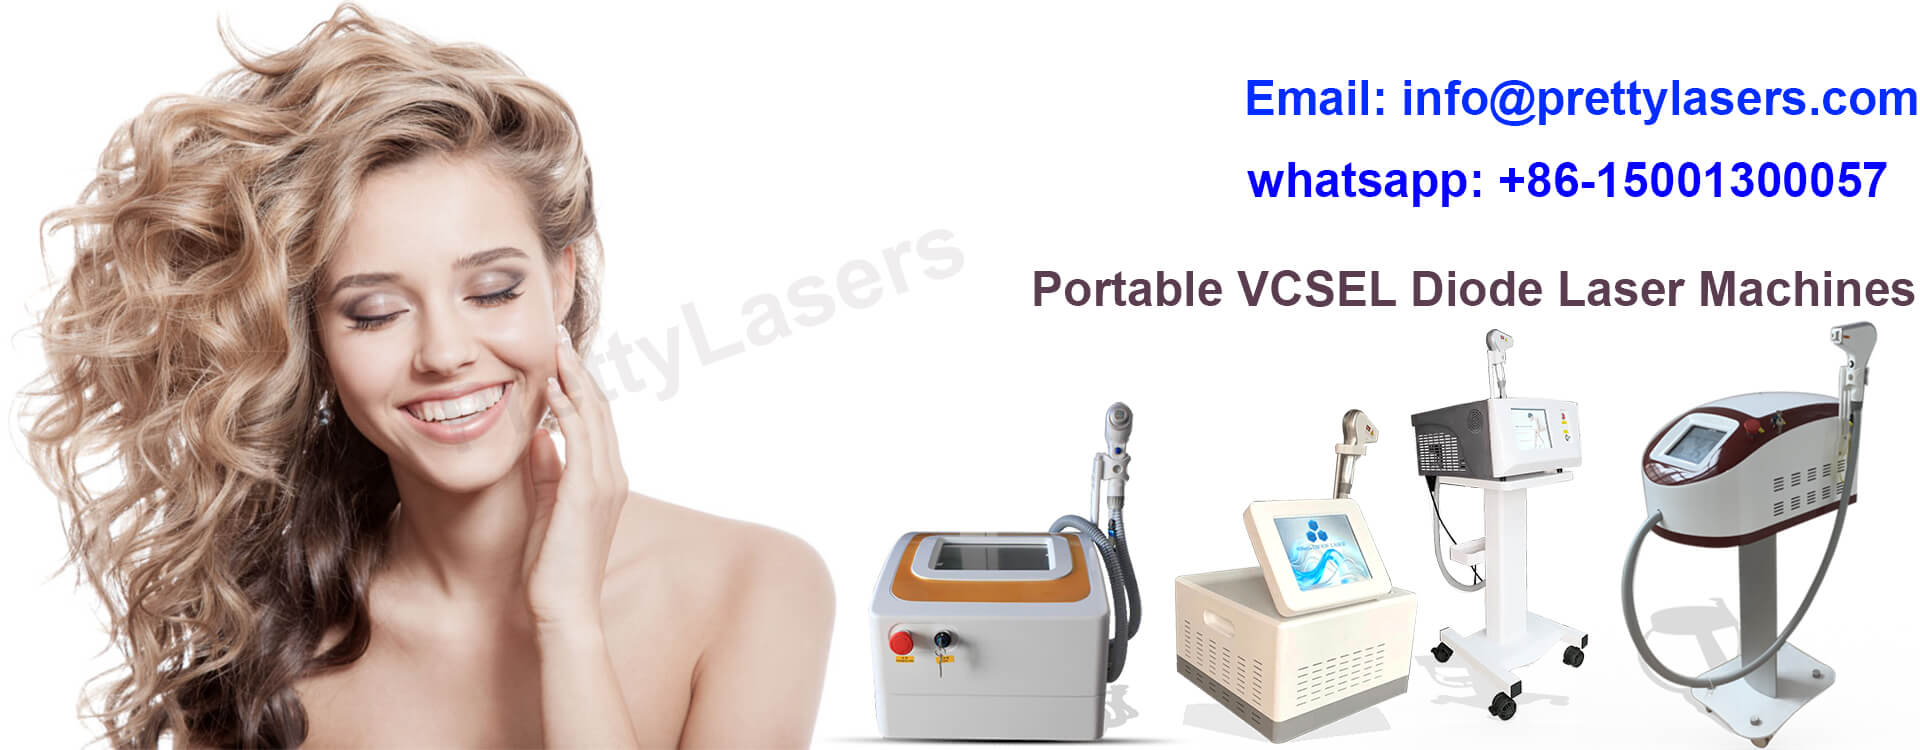 Portable Non Channel Diode Laser